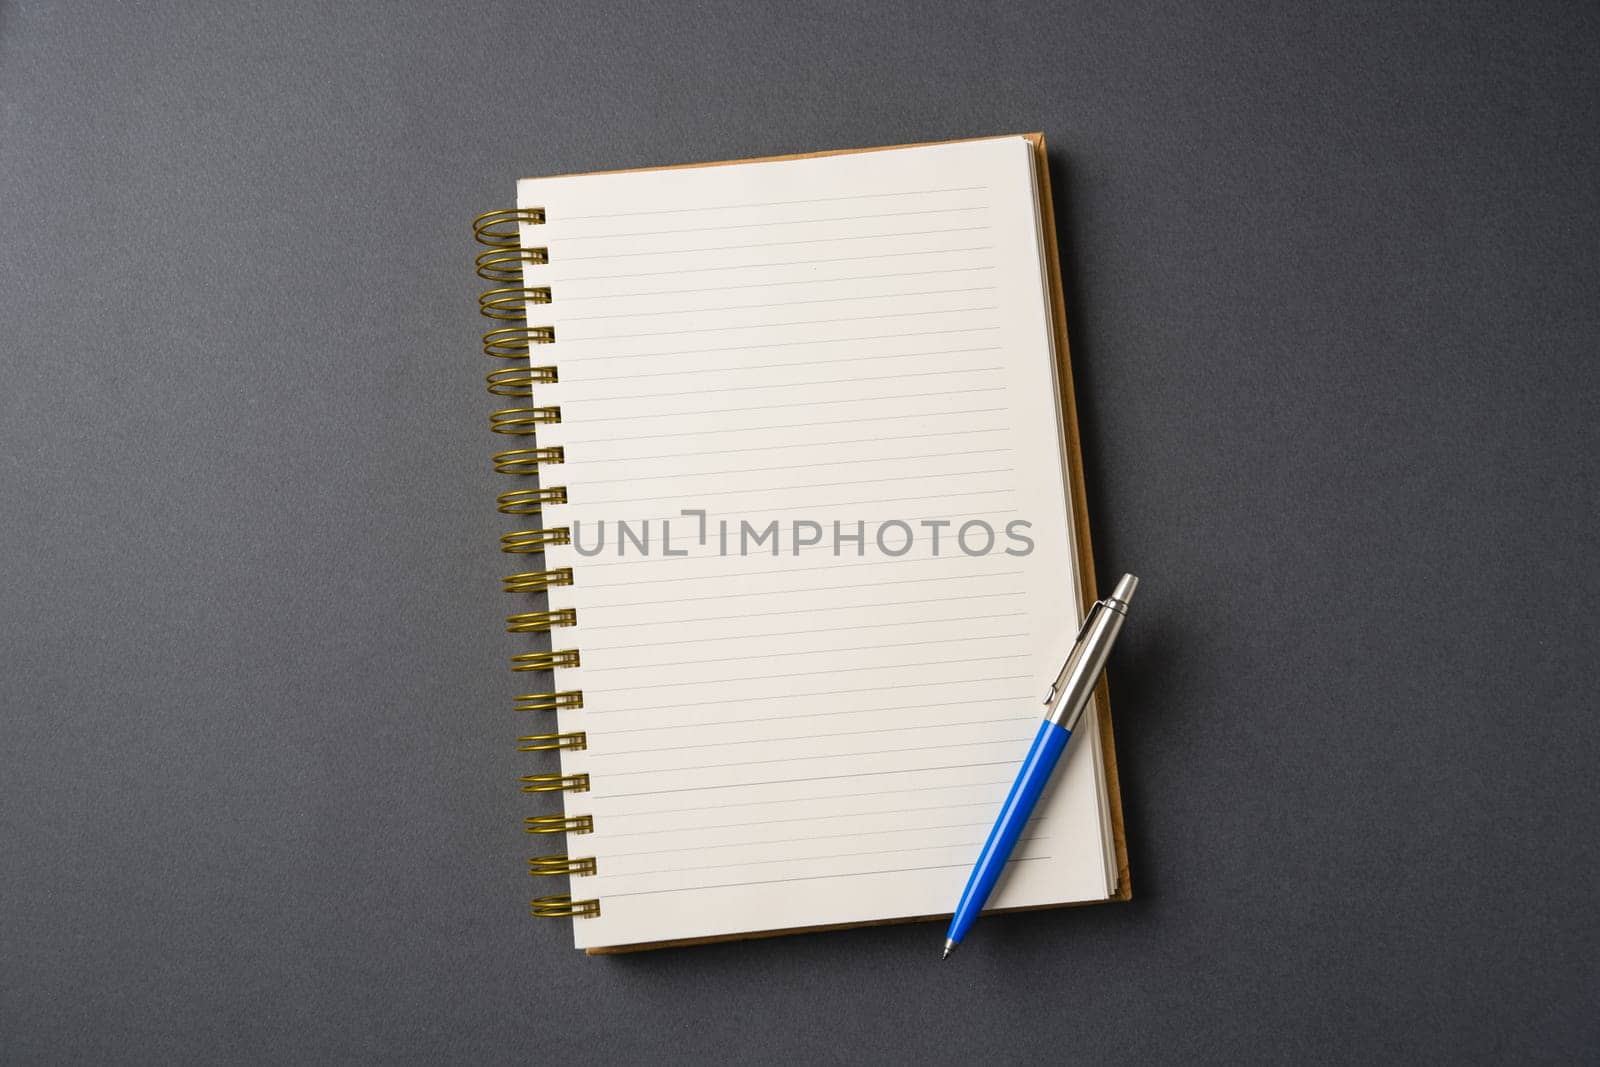 Ballpoint pen made of blue plastic and metal standing on lined notebook by Sonat